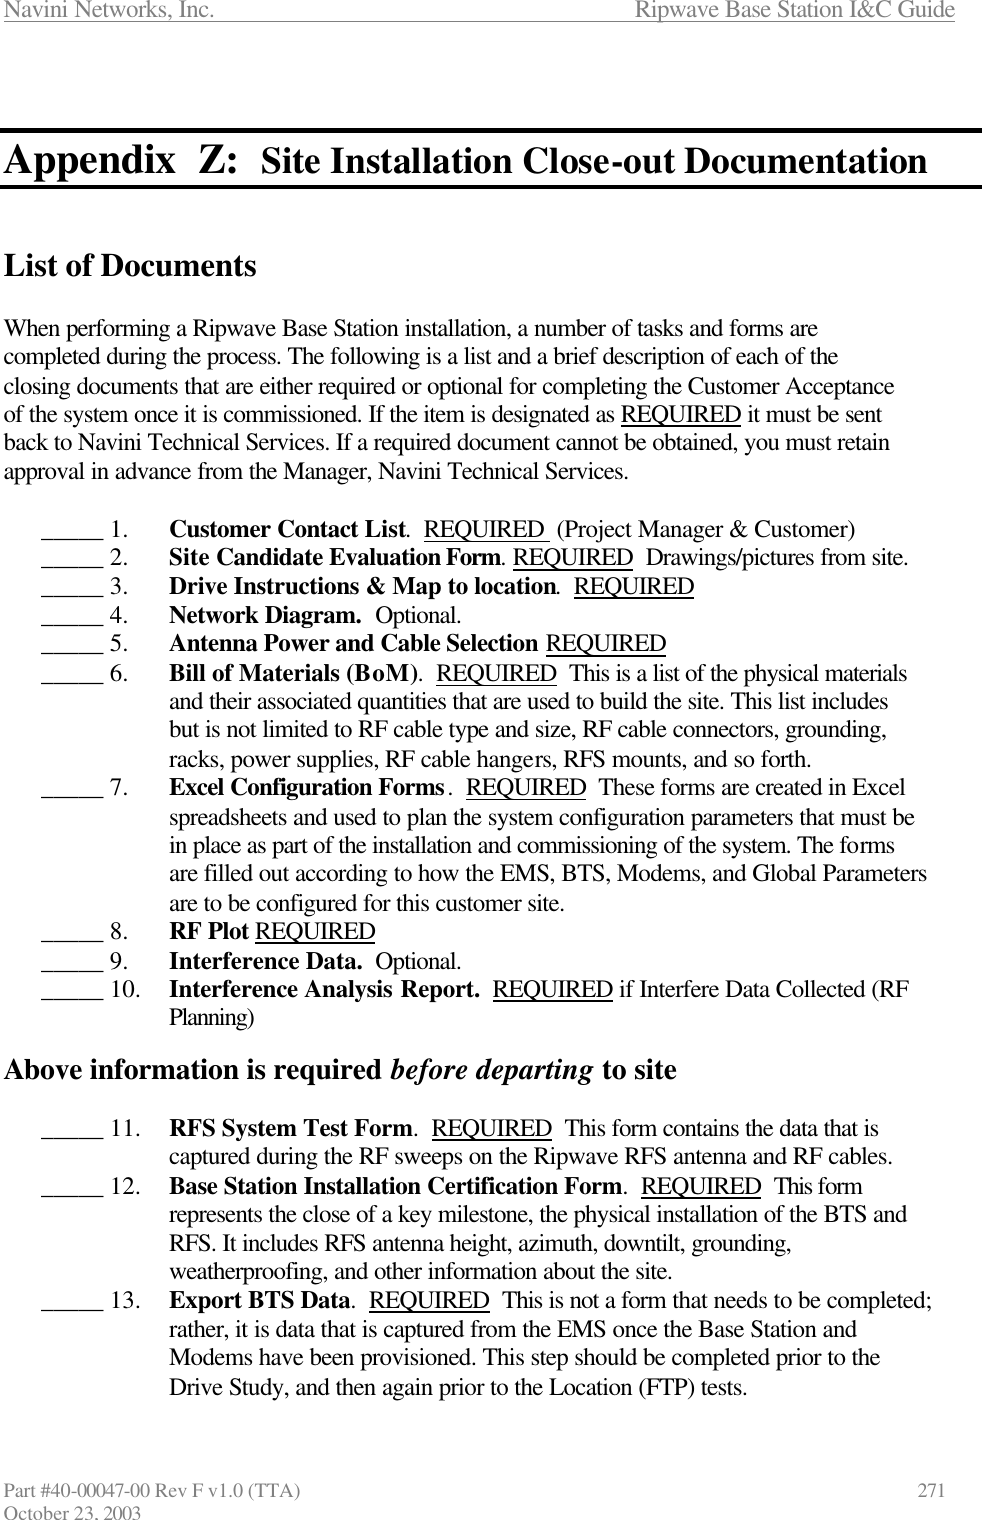 Navini Networks, Inc.                      Ripwave Base Station I&amp;C Guide Part #40-00047-00 Rev F v1.0 (TTA)            271 October 23, 2003   Appendix  Z:  Site Installation Close-out Documentation   List of Documents  When performing a Ripwave Base Station installation, a number of tasks and forms are completed during the process. The following is a list and a brief description of each of the closing documents that are either required or optional for completing the Customer Acceptance of the system once it is commissioned. If the item is designated as REQUIRED it must be sent back to Navini Technical Services. If a required document cannot be obtained, you must retain approval in advance from the Manager, Navini Technical Services.   _____ 1.  Customer Contact List.  REQUIRED  (Project Manager &amp; Customer) _____ 2.  Site Candidate Evaluation Form. REQUIRED  Drawings/pictures from site. _____ 3.  Drive Instructions &amp; Map to location.  REQUIRED _____ 4.  Network Diagram.  Optional. _____ 5.  Antenna Power and Cable Selection REQUIRED _____ 6.  Bill of Materials (BoM).  REQUIRED  This is a list of the physical materials and their associated quantities that are used to build the site. This list includes but is not limited to RF cable type and size, RF cable connectors, grounding, racks, power supplies, RF cable hangers, RFS mounts, and so forth. _____ 7.  Excel Configuration Forms.  REQUIRED  These forms are created in Excel spreadsheets and used to plan the system configuration parameters that must be in place as part of the installation and commissioning of the system. The forms are filled out according to how the EMS, BTS, Modems, and Global Parameters are to be configured for this customer site. _____ 8.  RF Plot REQUIRED _____ 9.  Interference Data.  Optional. _____ 10.  Interference Analysis Report.  REQUIRED if Interfere Data Collected (RF Planning)  Above information is required before departing to site  _____ 11.  RFS System Test Form.  REQUIRED  This form contains the data that is captured during the RF sweeps on the Ripwave RFS antenna and RF cables. _____ 12.  Base Station Installation Certification Form.  REQUIRED  This form represents the close of a key milestone, the physical installation of the BTS and RFS. It includes RFS antenna height, azimuth, downtilt, grounding, weatherproofing, and other information about the site. _____ 13.  Export BTS Data.  REQUIRED  This is not a form that needs to be completed; rather, it is data that is captured from the EMS once the Base Station and Modems have been provisioned. This step should be completed prior to the Drive Study, and then again prior to the Location (FTP) tests. 